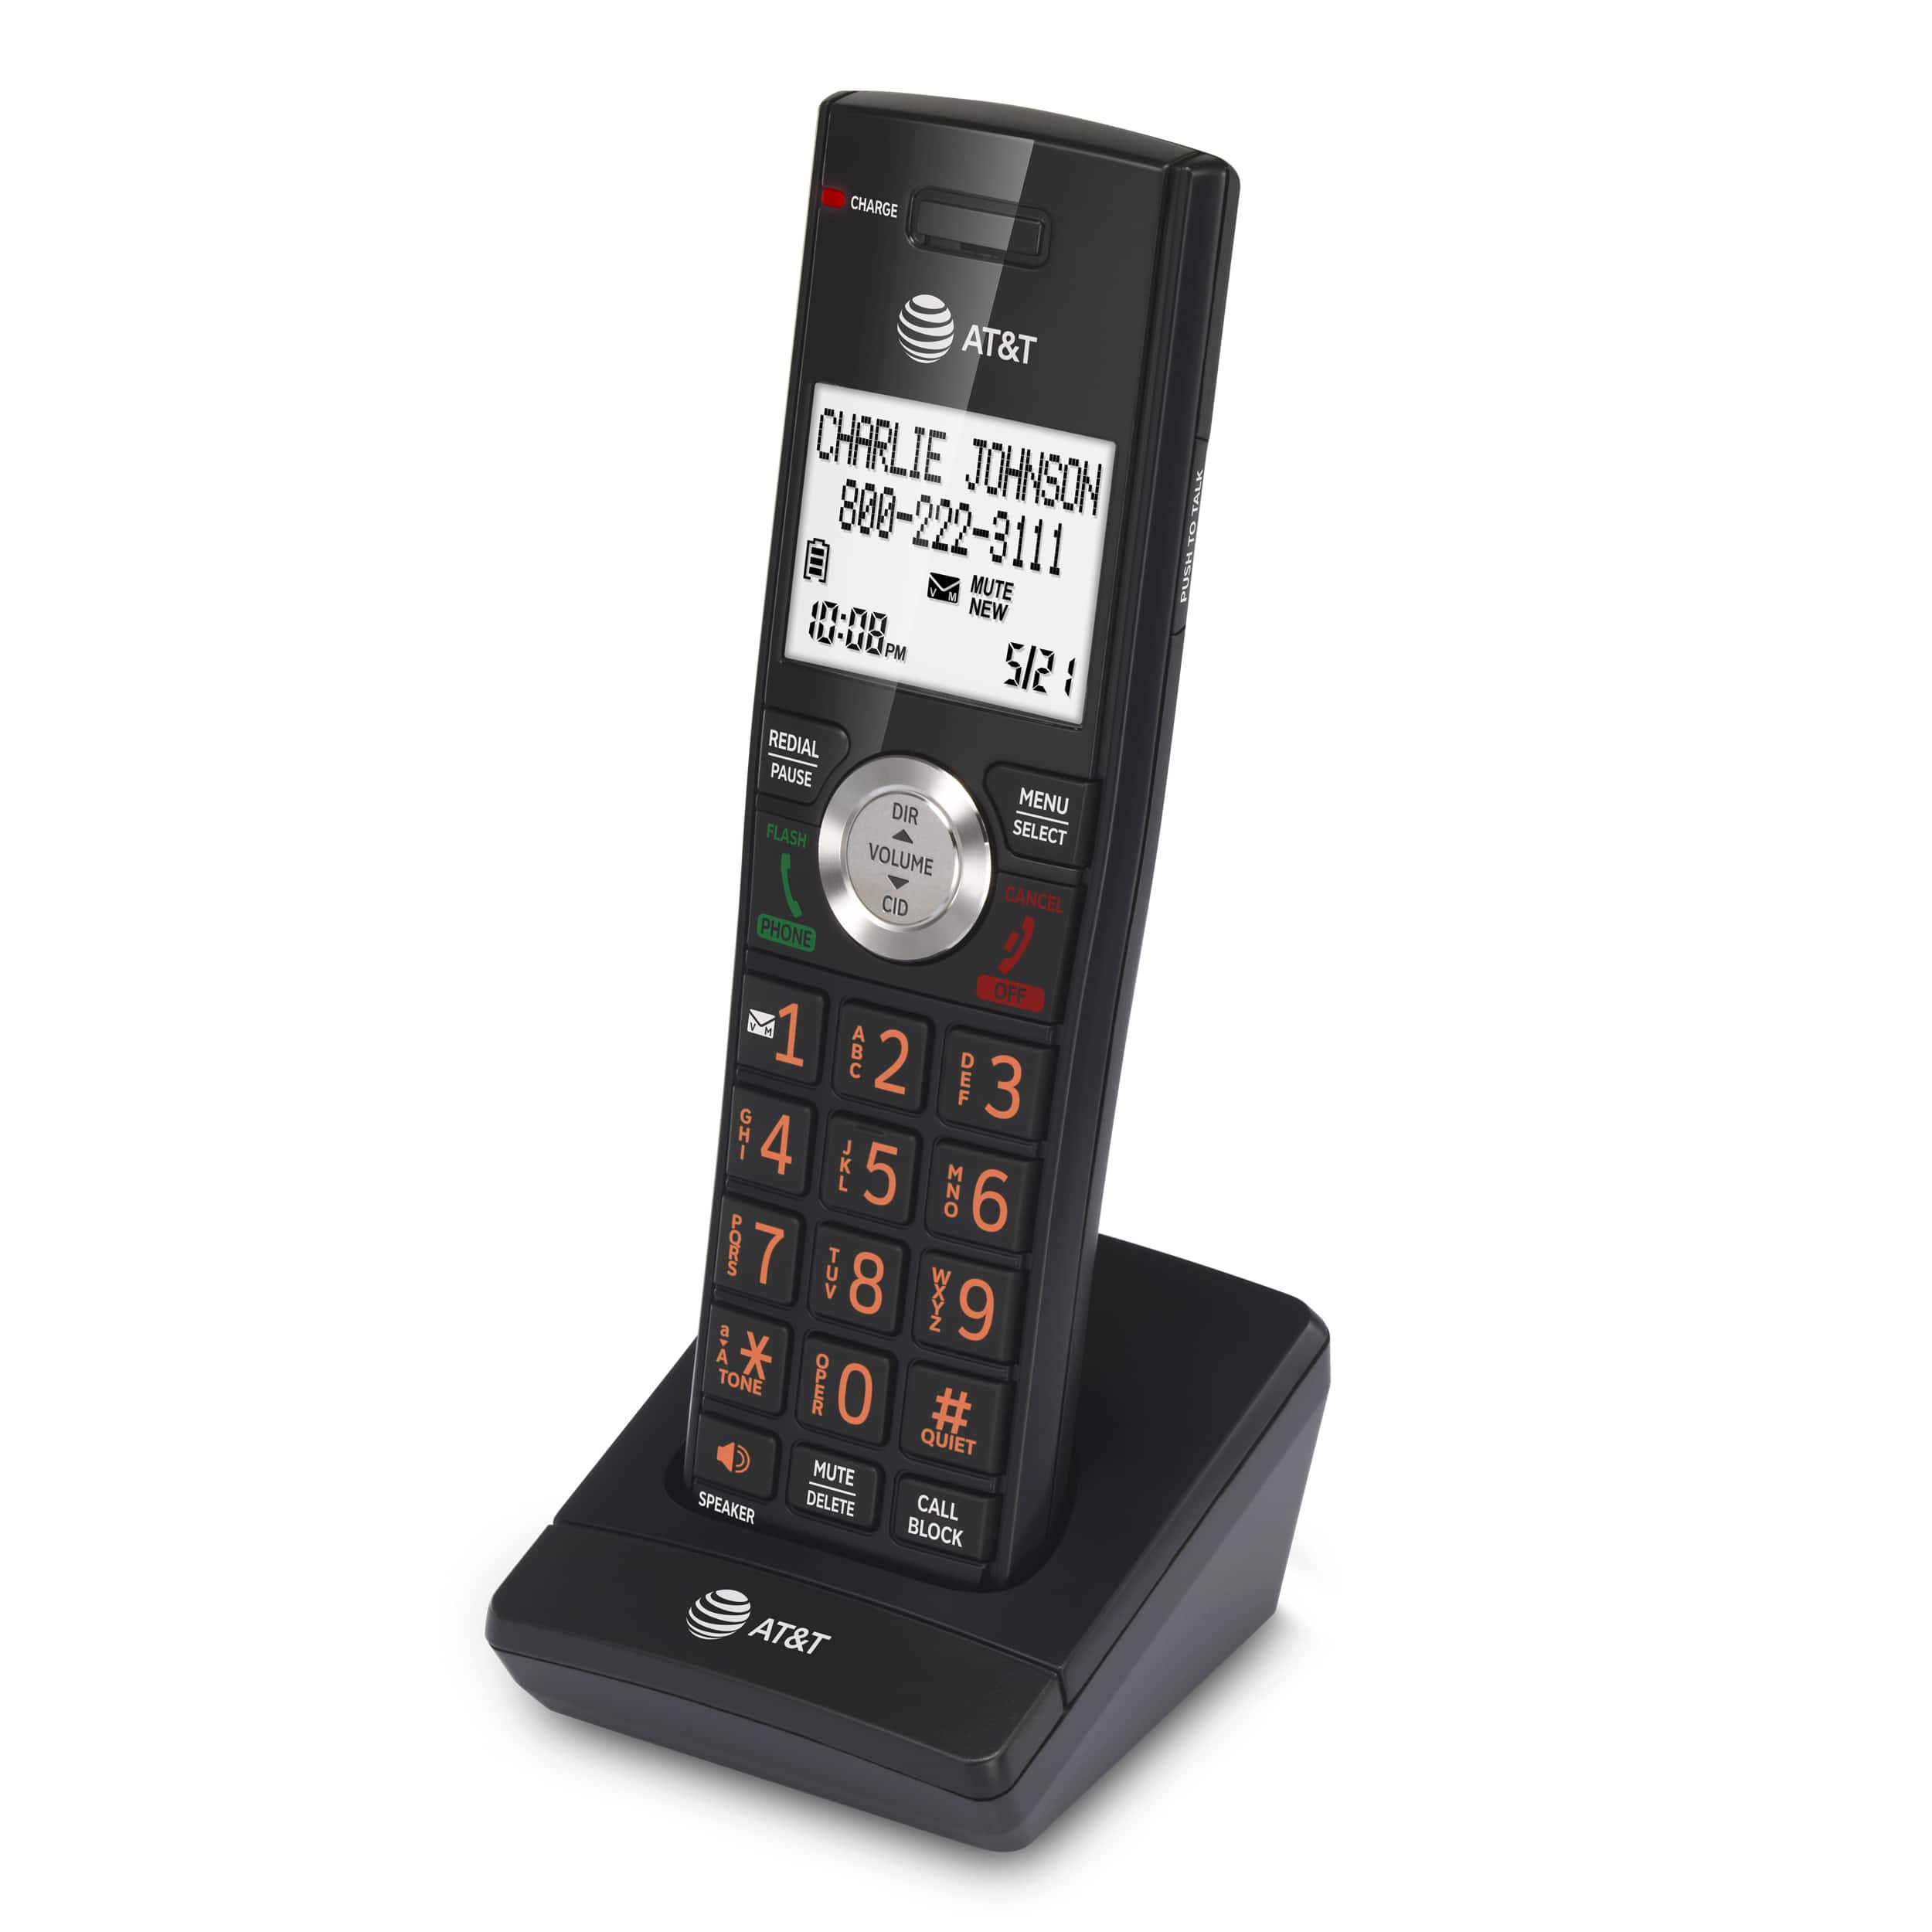 Cordless Accessory Handset for AT&T CL82207, CL82267, CL82307, CL82367, CL82407, CL83207, CL83407, CL84107, CL84207 and CL84327 - view 2